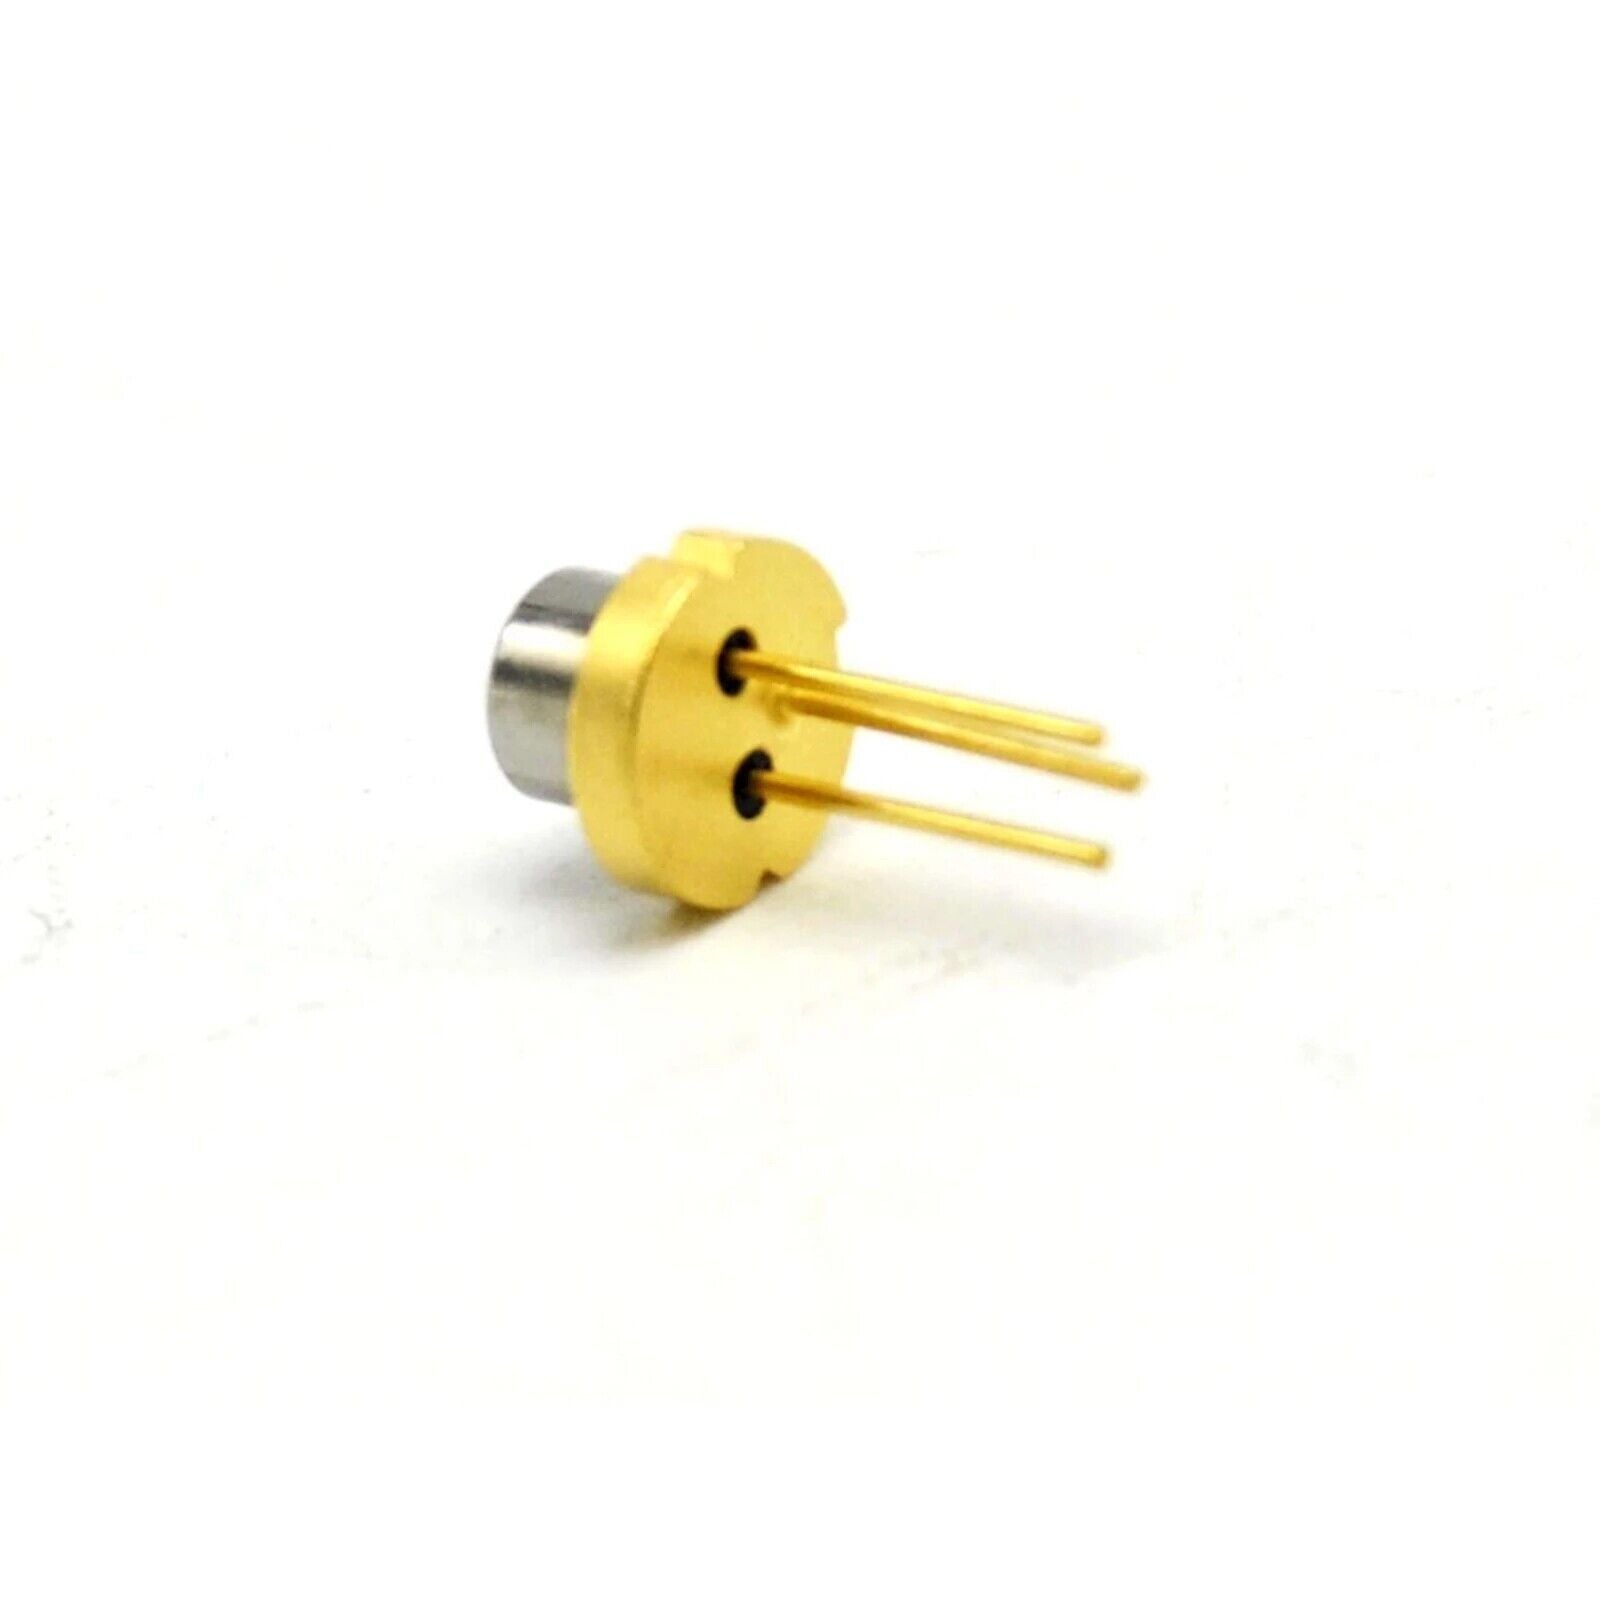 Ushio HL6320G-A 638nm 10mw Red Laser Diode